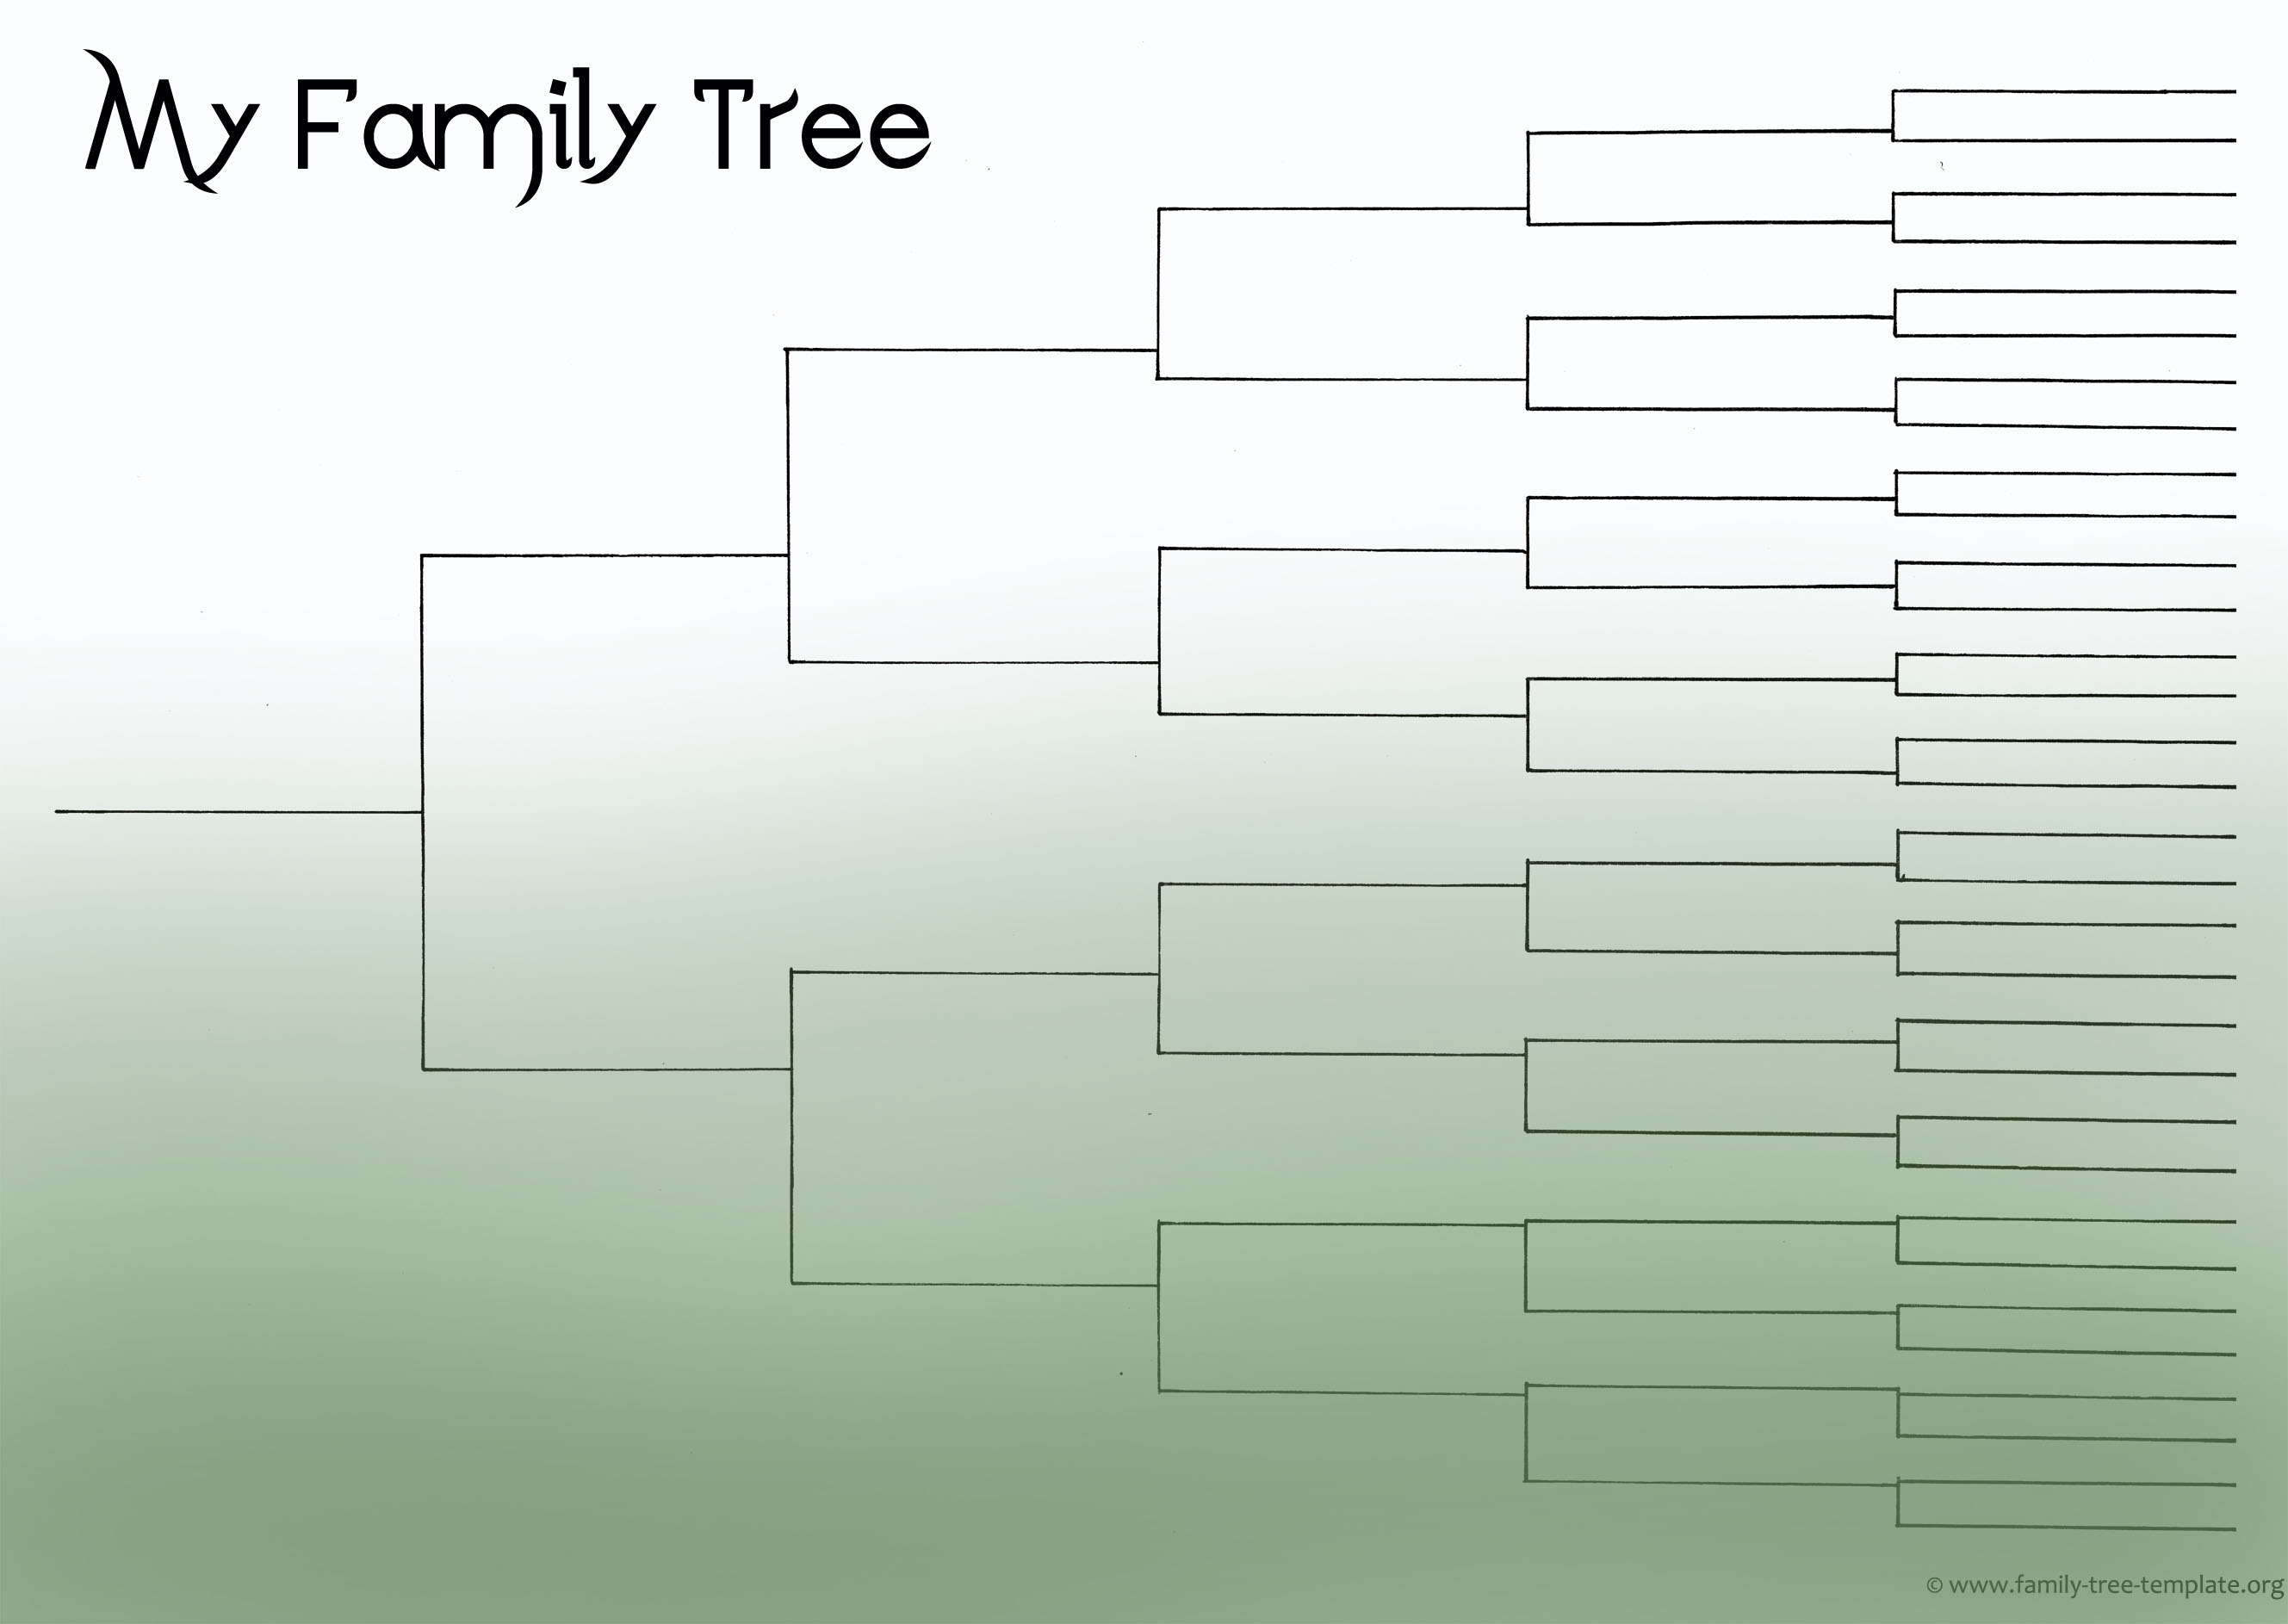 Printable family tree chart with pins tracing ancestors all the way back to great-great-great-grandparents